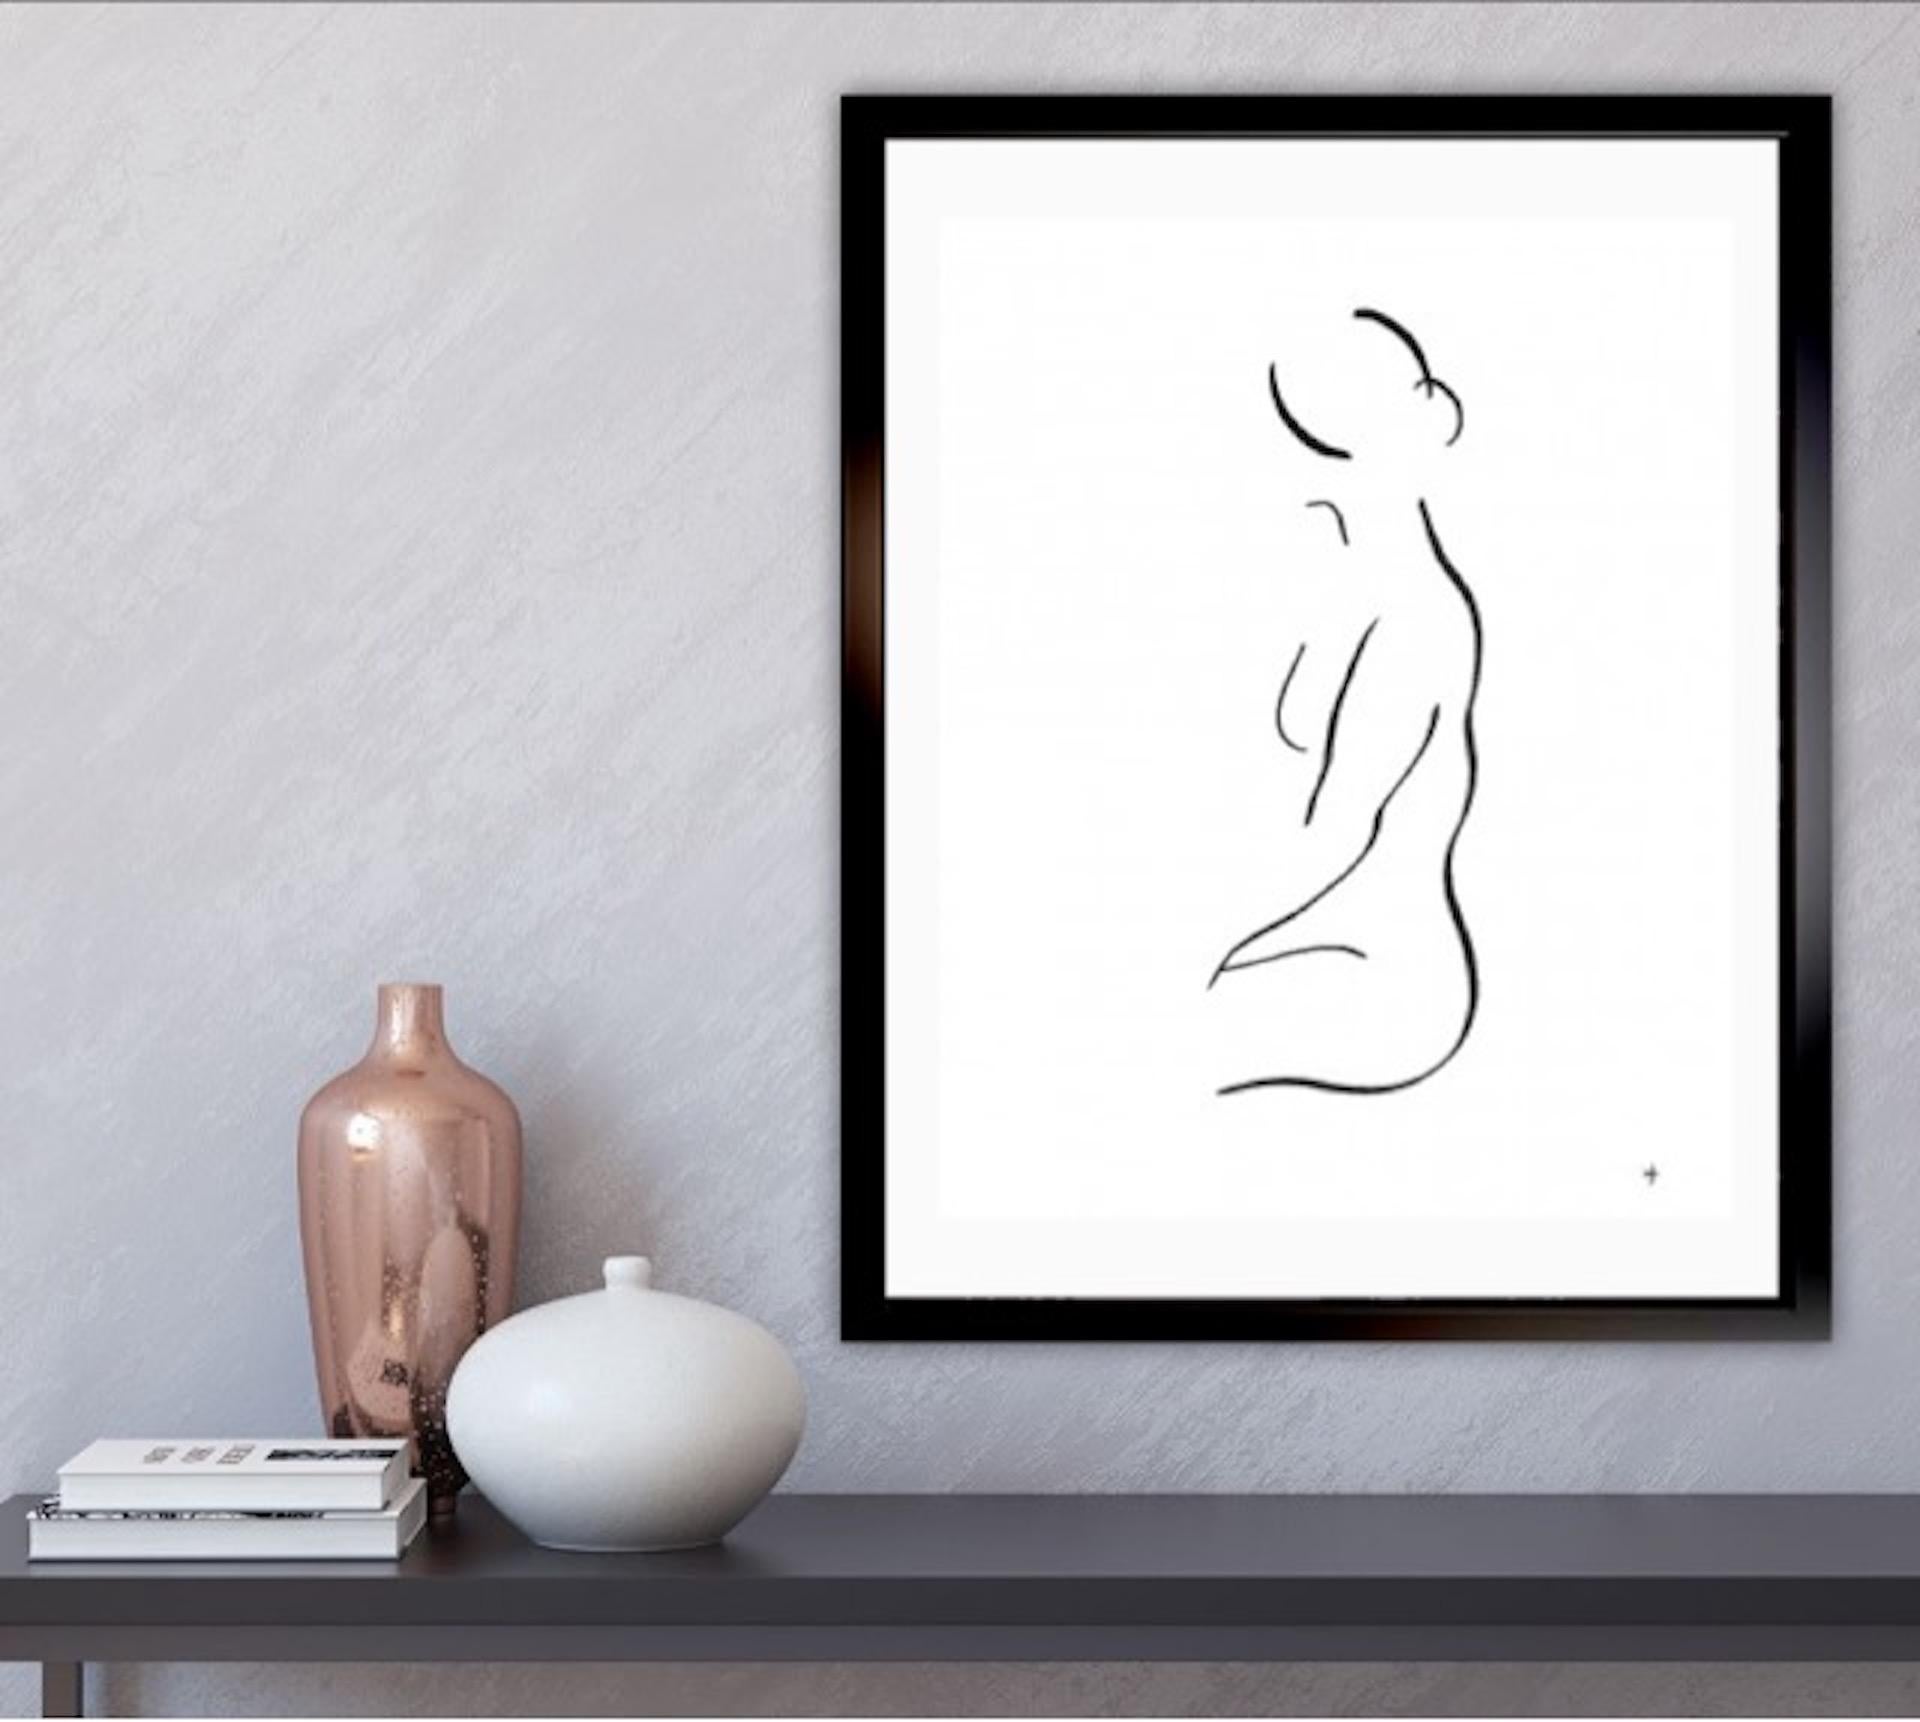 David Jones

Original Figurative Drawing

Black Ink on Paper

IMAGE SIZE: H:35.5CM X W:26CM
MOUNT SIZE: H:50CM X W:40CM

Sold Unframed

 

Series 2 Nude #9C is an original drawing by David Jones. The minimalist style of the work gives the figurative